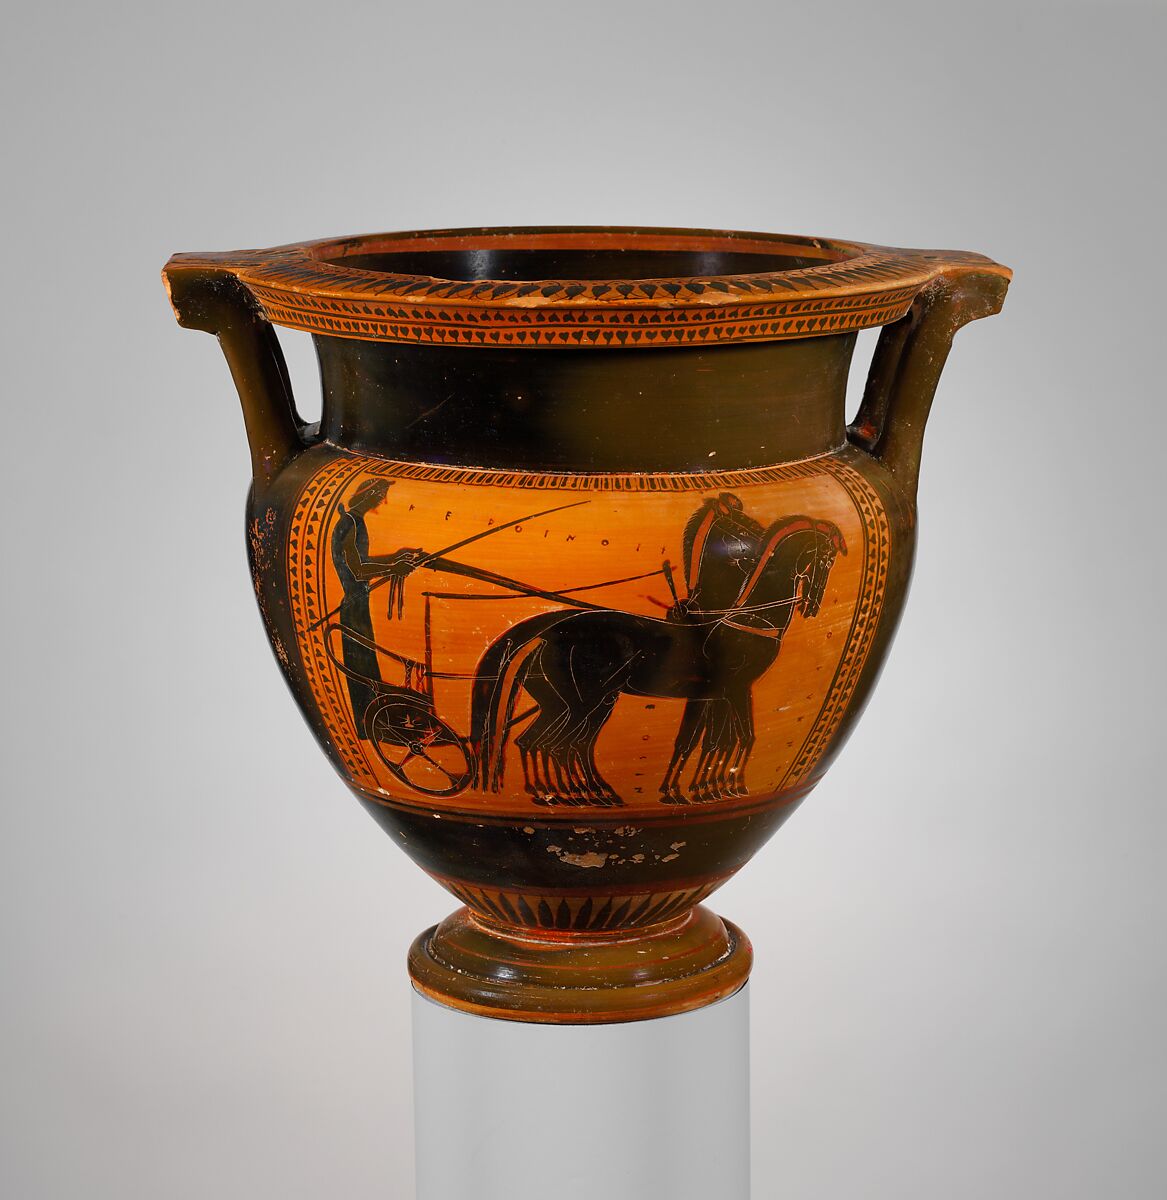 Terracotta column-krater (bowl for mixing wine and water), Terracotta, Greek, Attic 